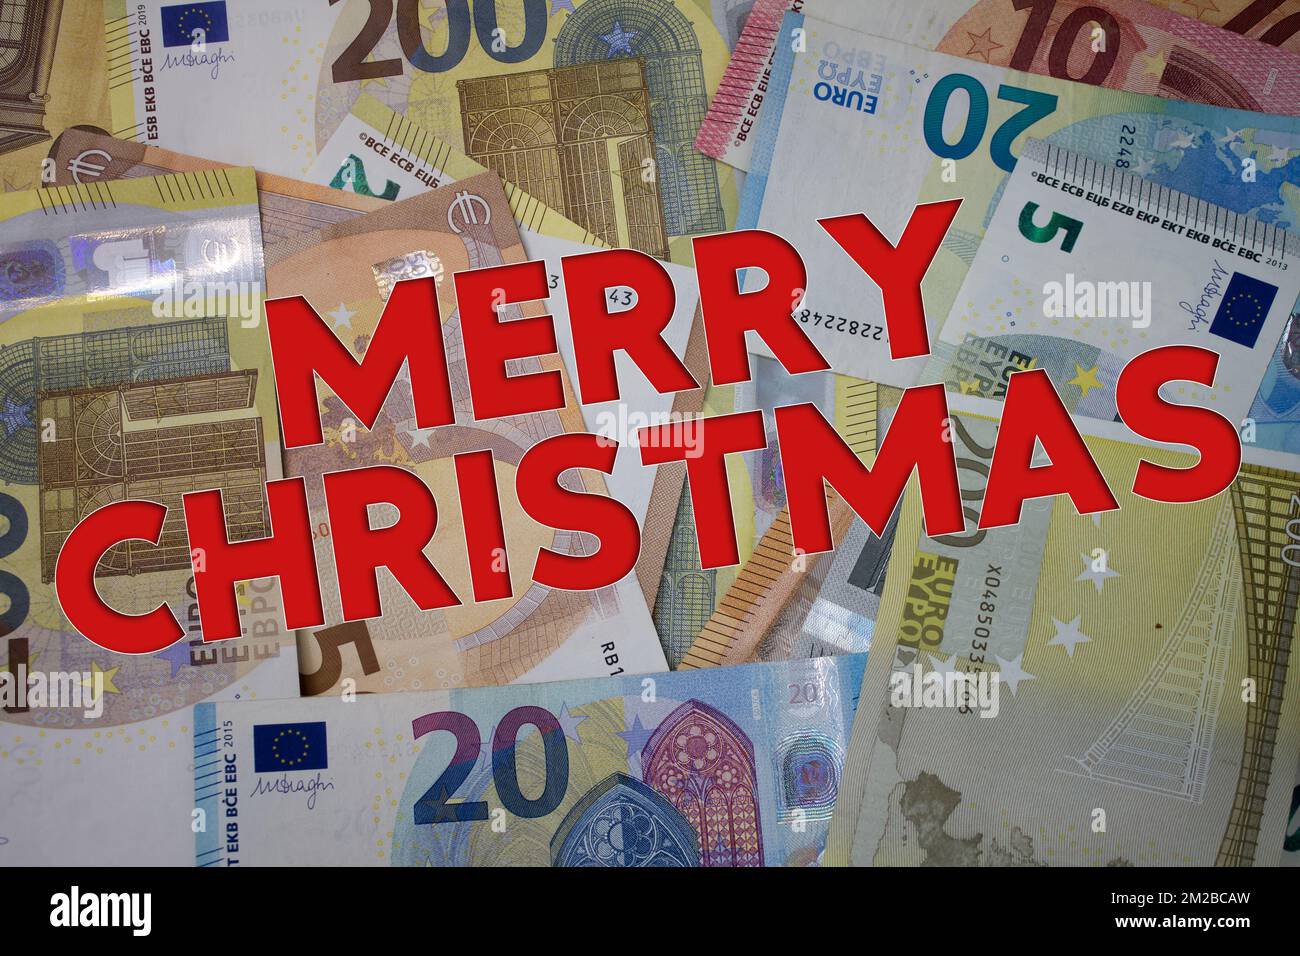 Merry Christmas word with money. Paper currency background with different banknotes. Stock Photo